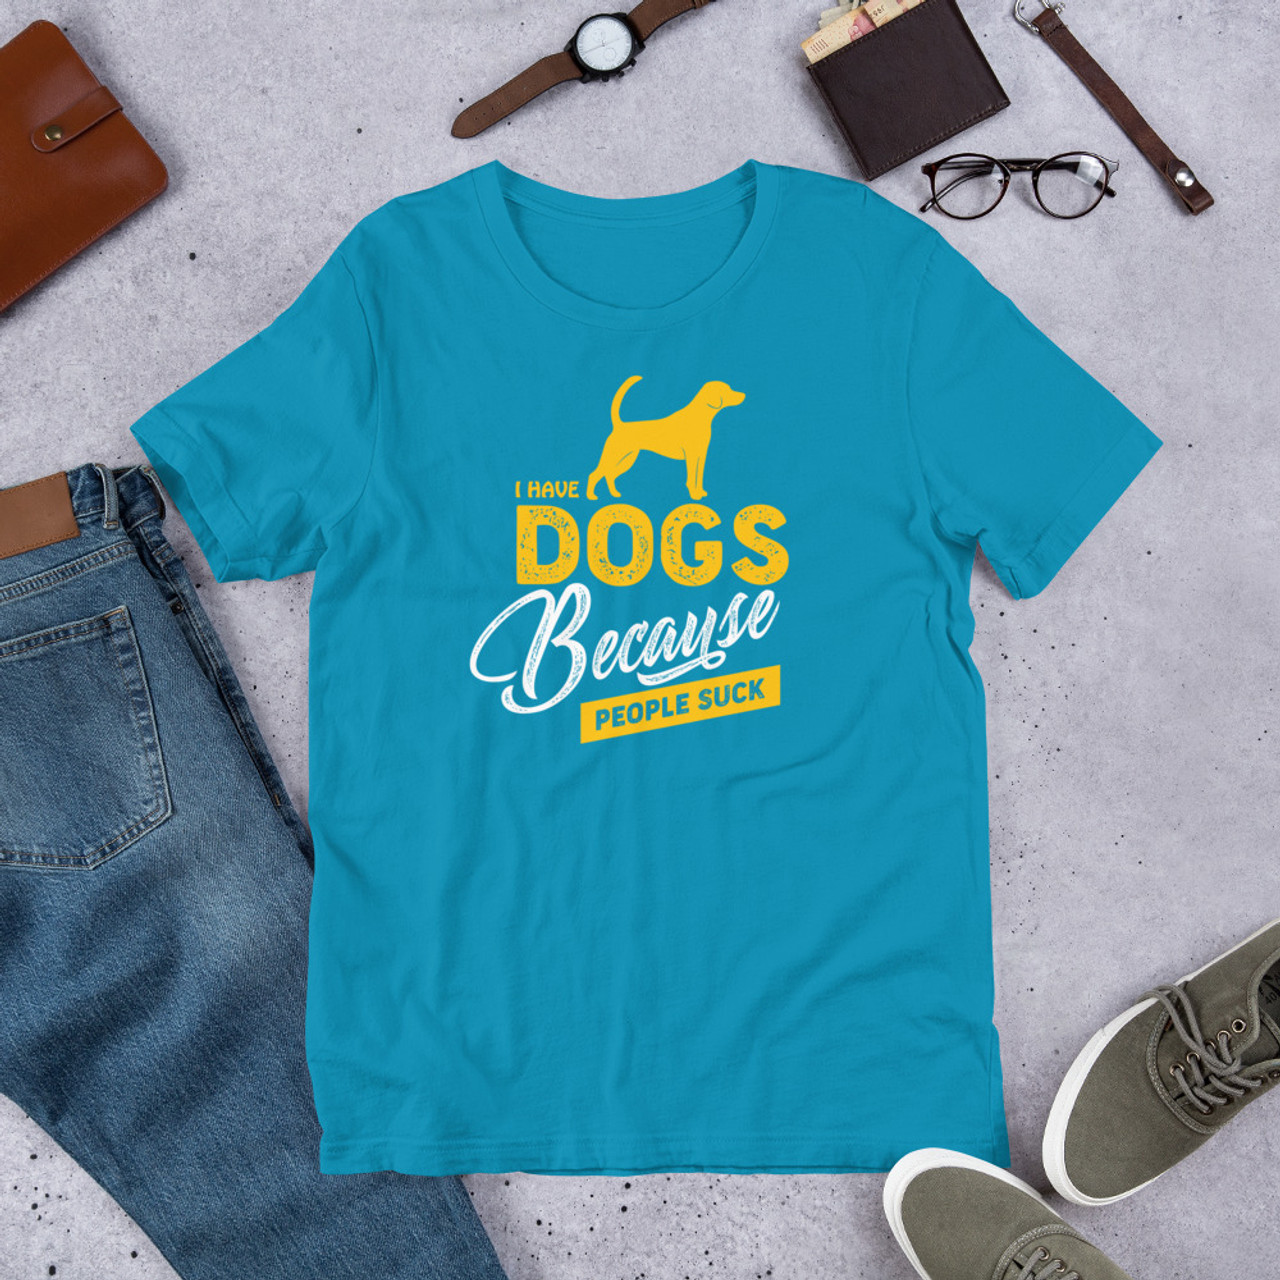 Aqua T-Shirt - Bella + Canvas 3001 I Have Dogs Because People Suck